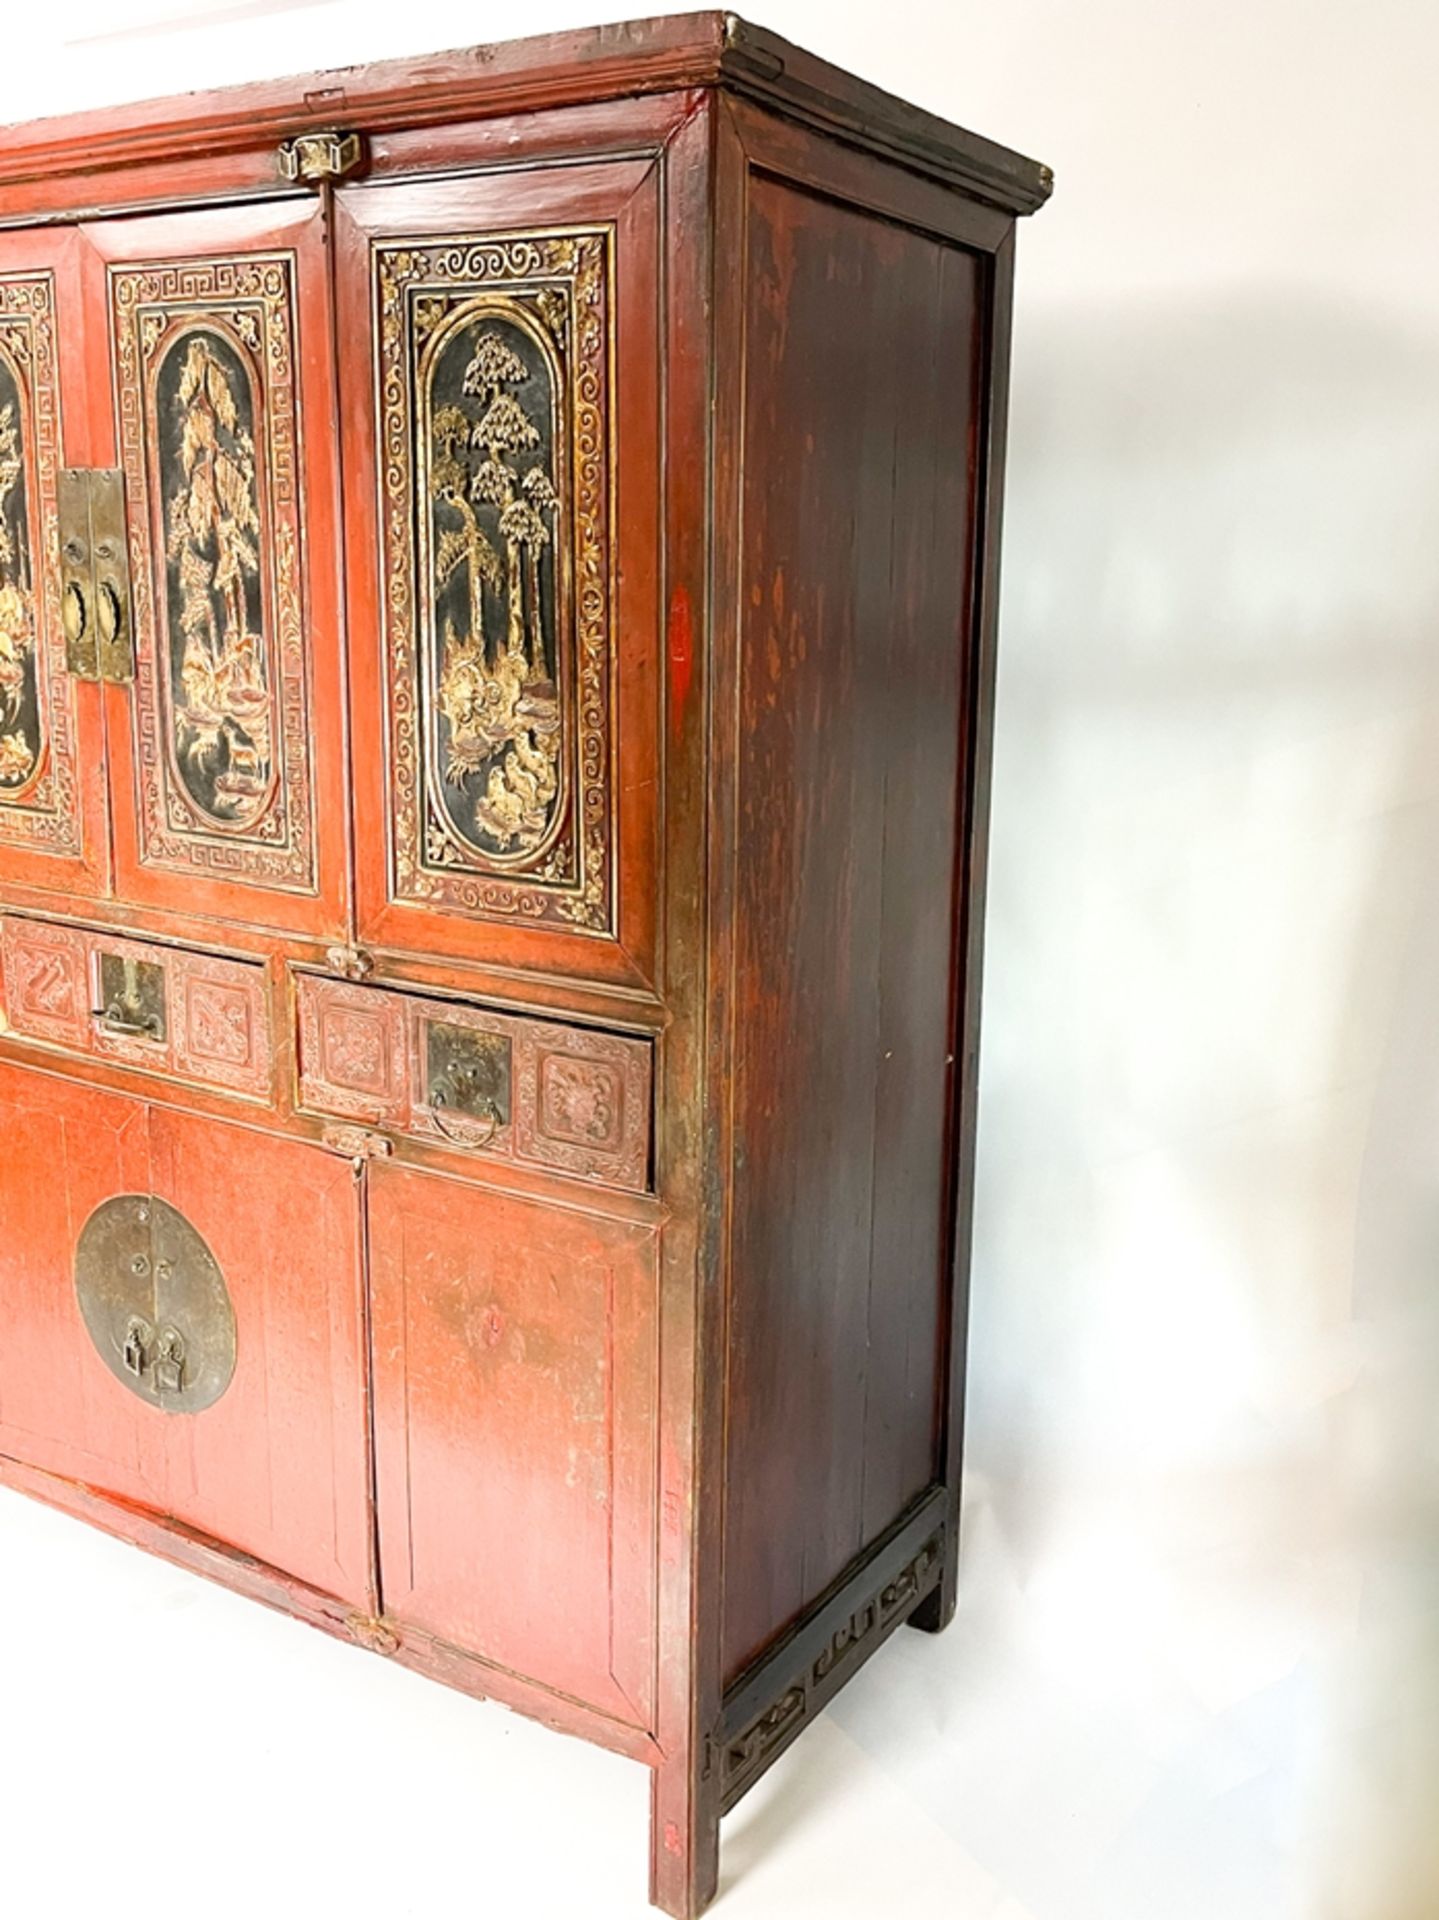 Red chinese cabinet from the 19th century - Image 7 of 12